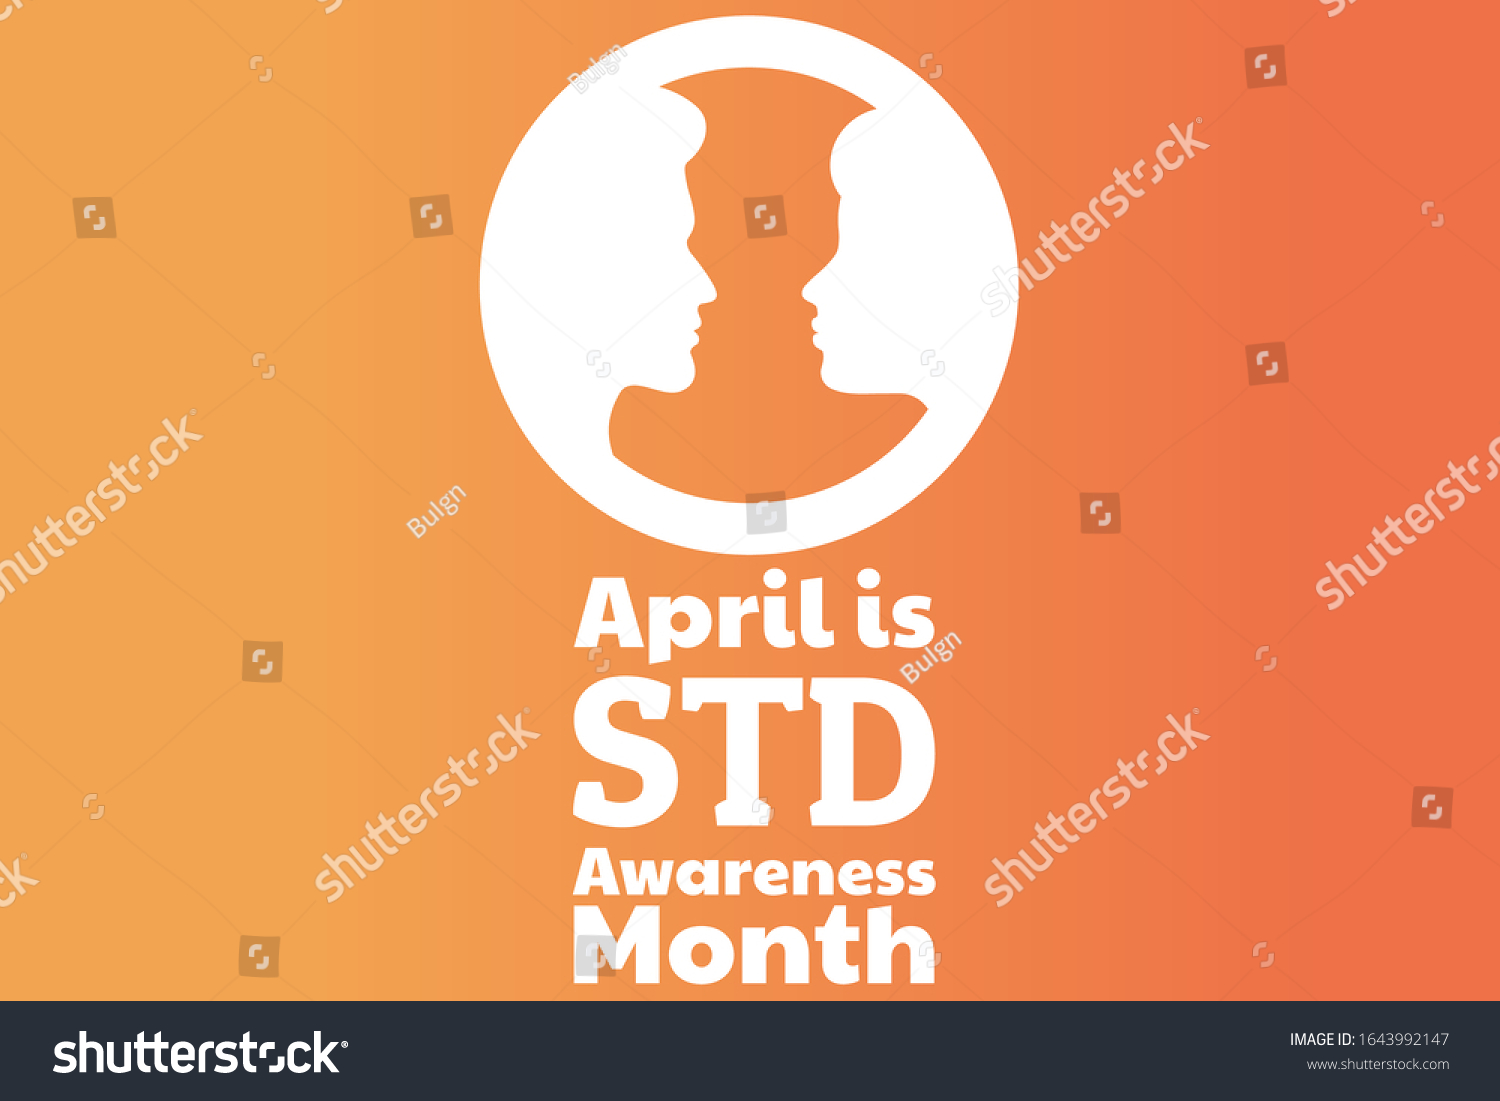 April Std Awareness Month Concept Sexually Stock Vector Royalty Free 1643992147 Shutterstock 